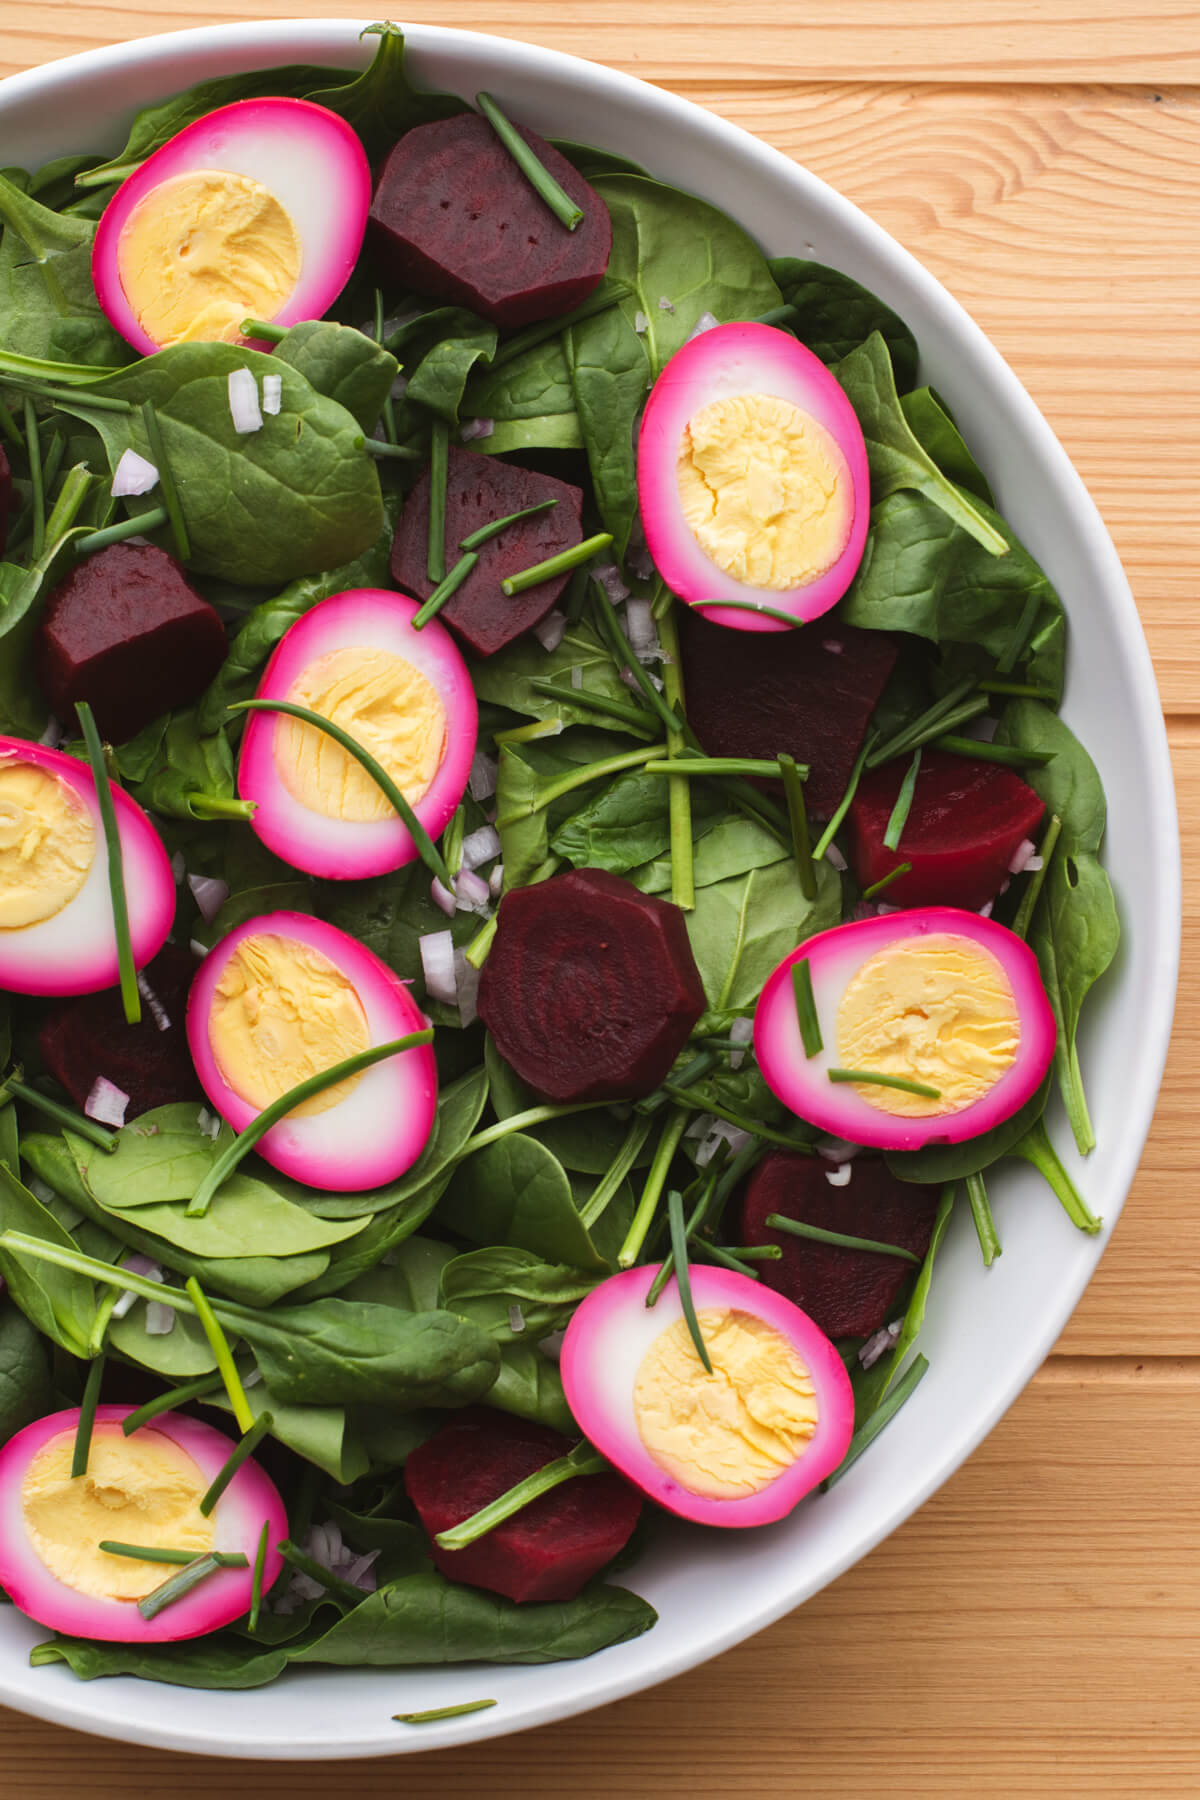 A white salad bowl filled with pickled beets, bright pink eggs and spinach salad